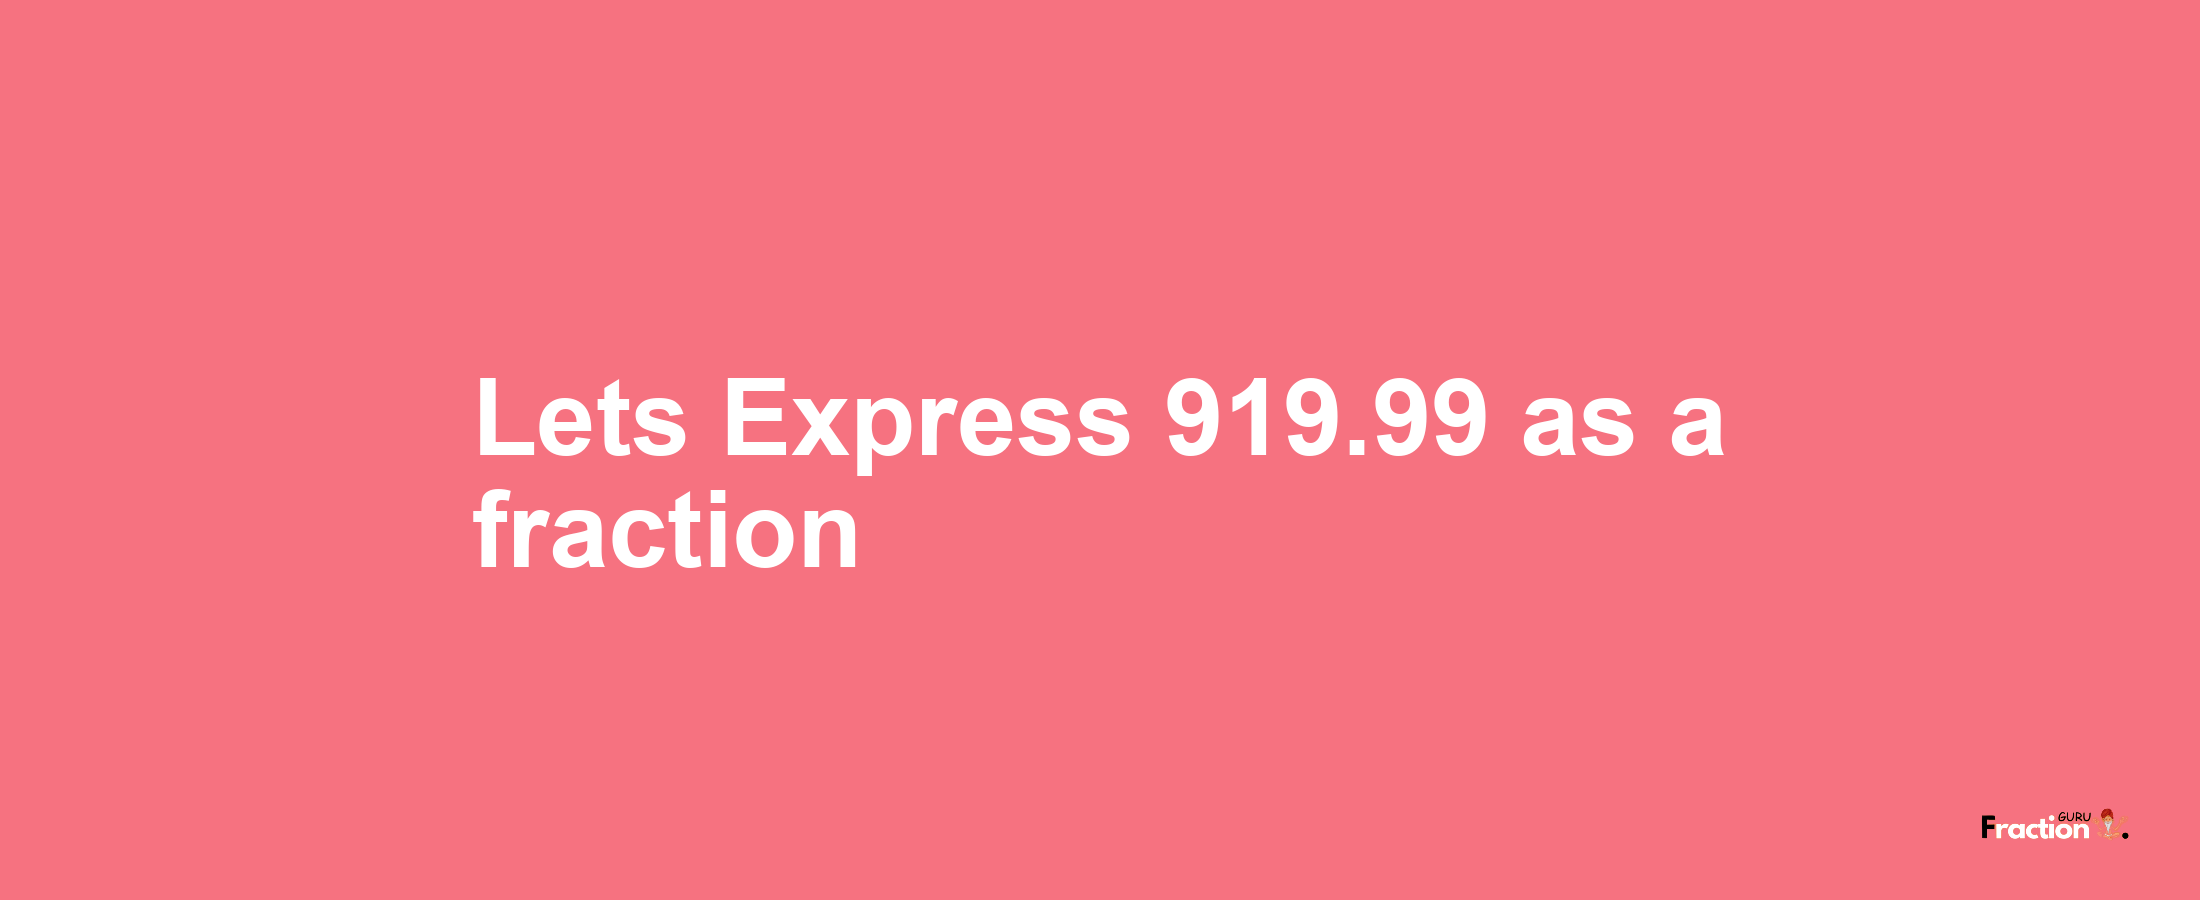 Lets Express 919.99 as afraction